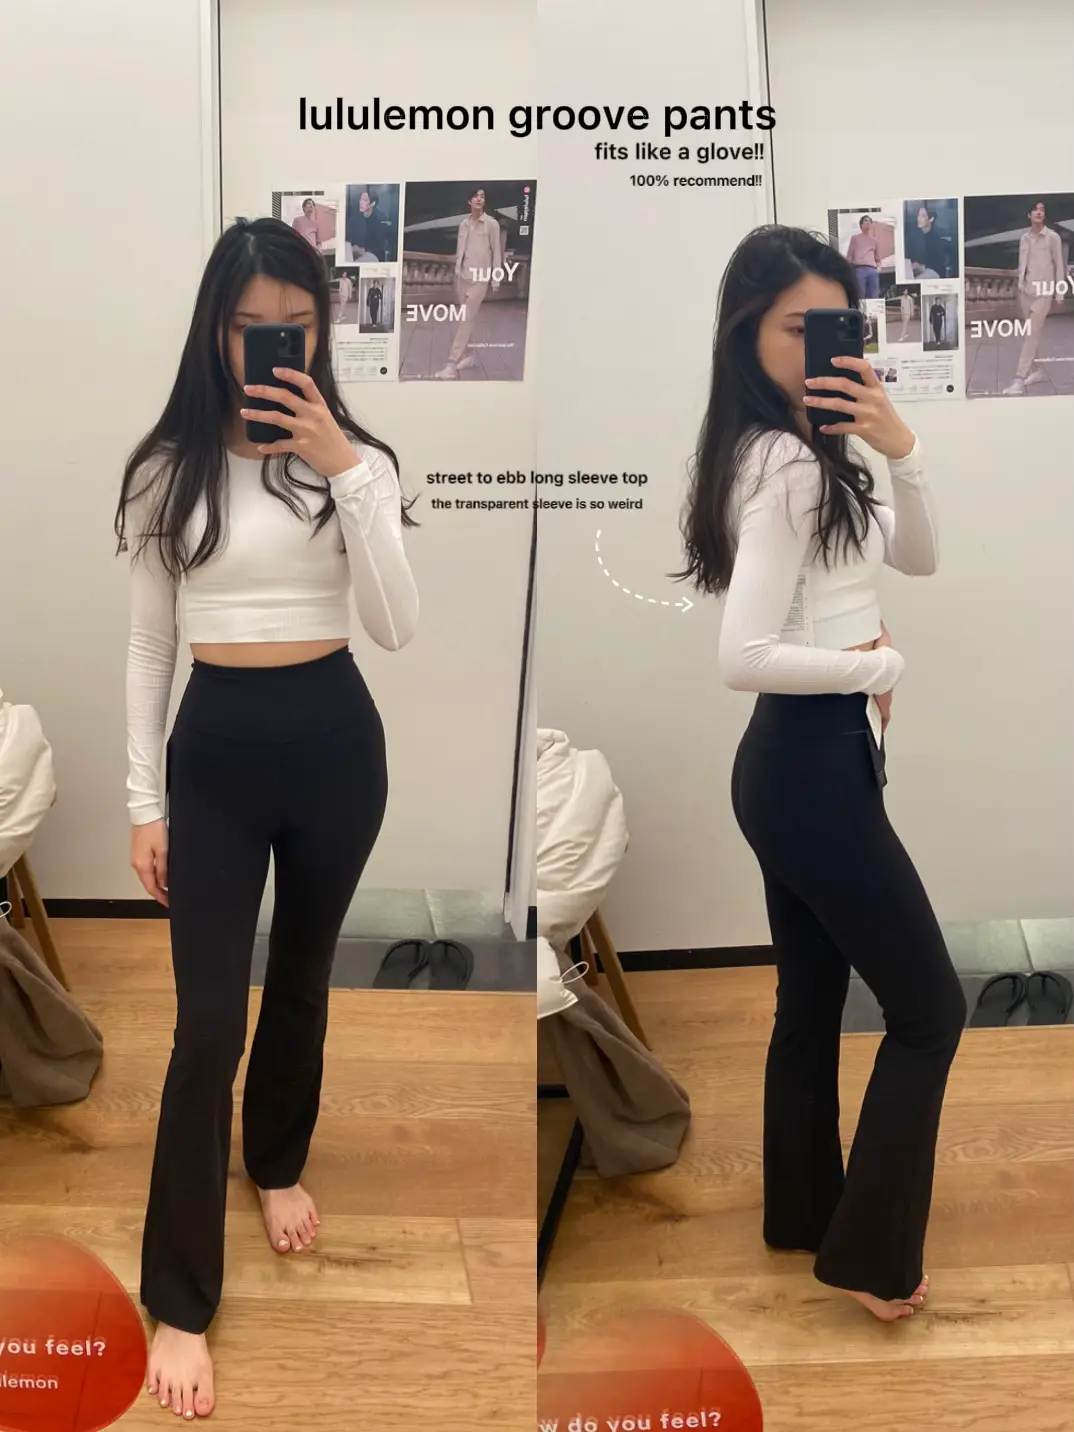 Lululemon Groove high rise flare pants, Women's Fashion, Activewear on  Carousell